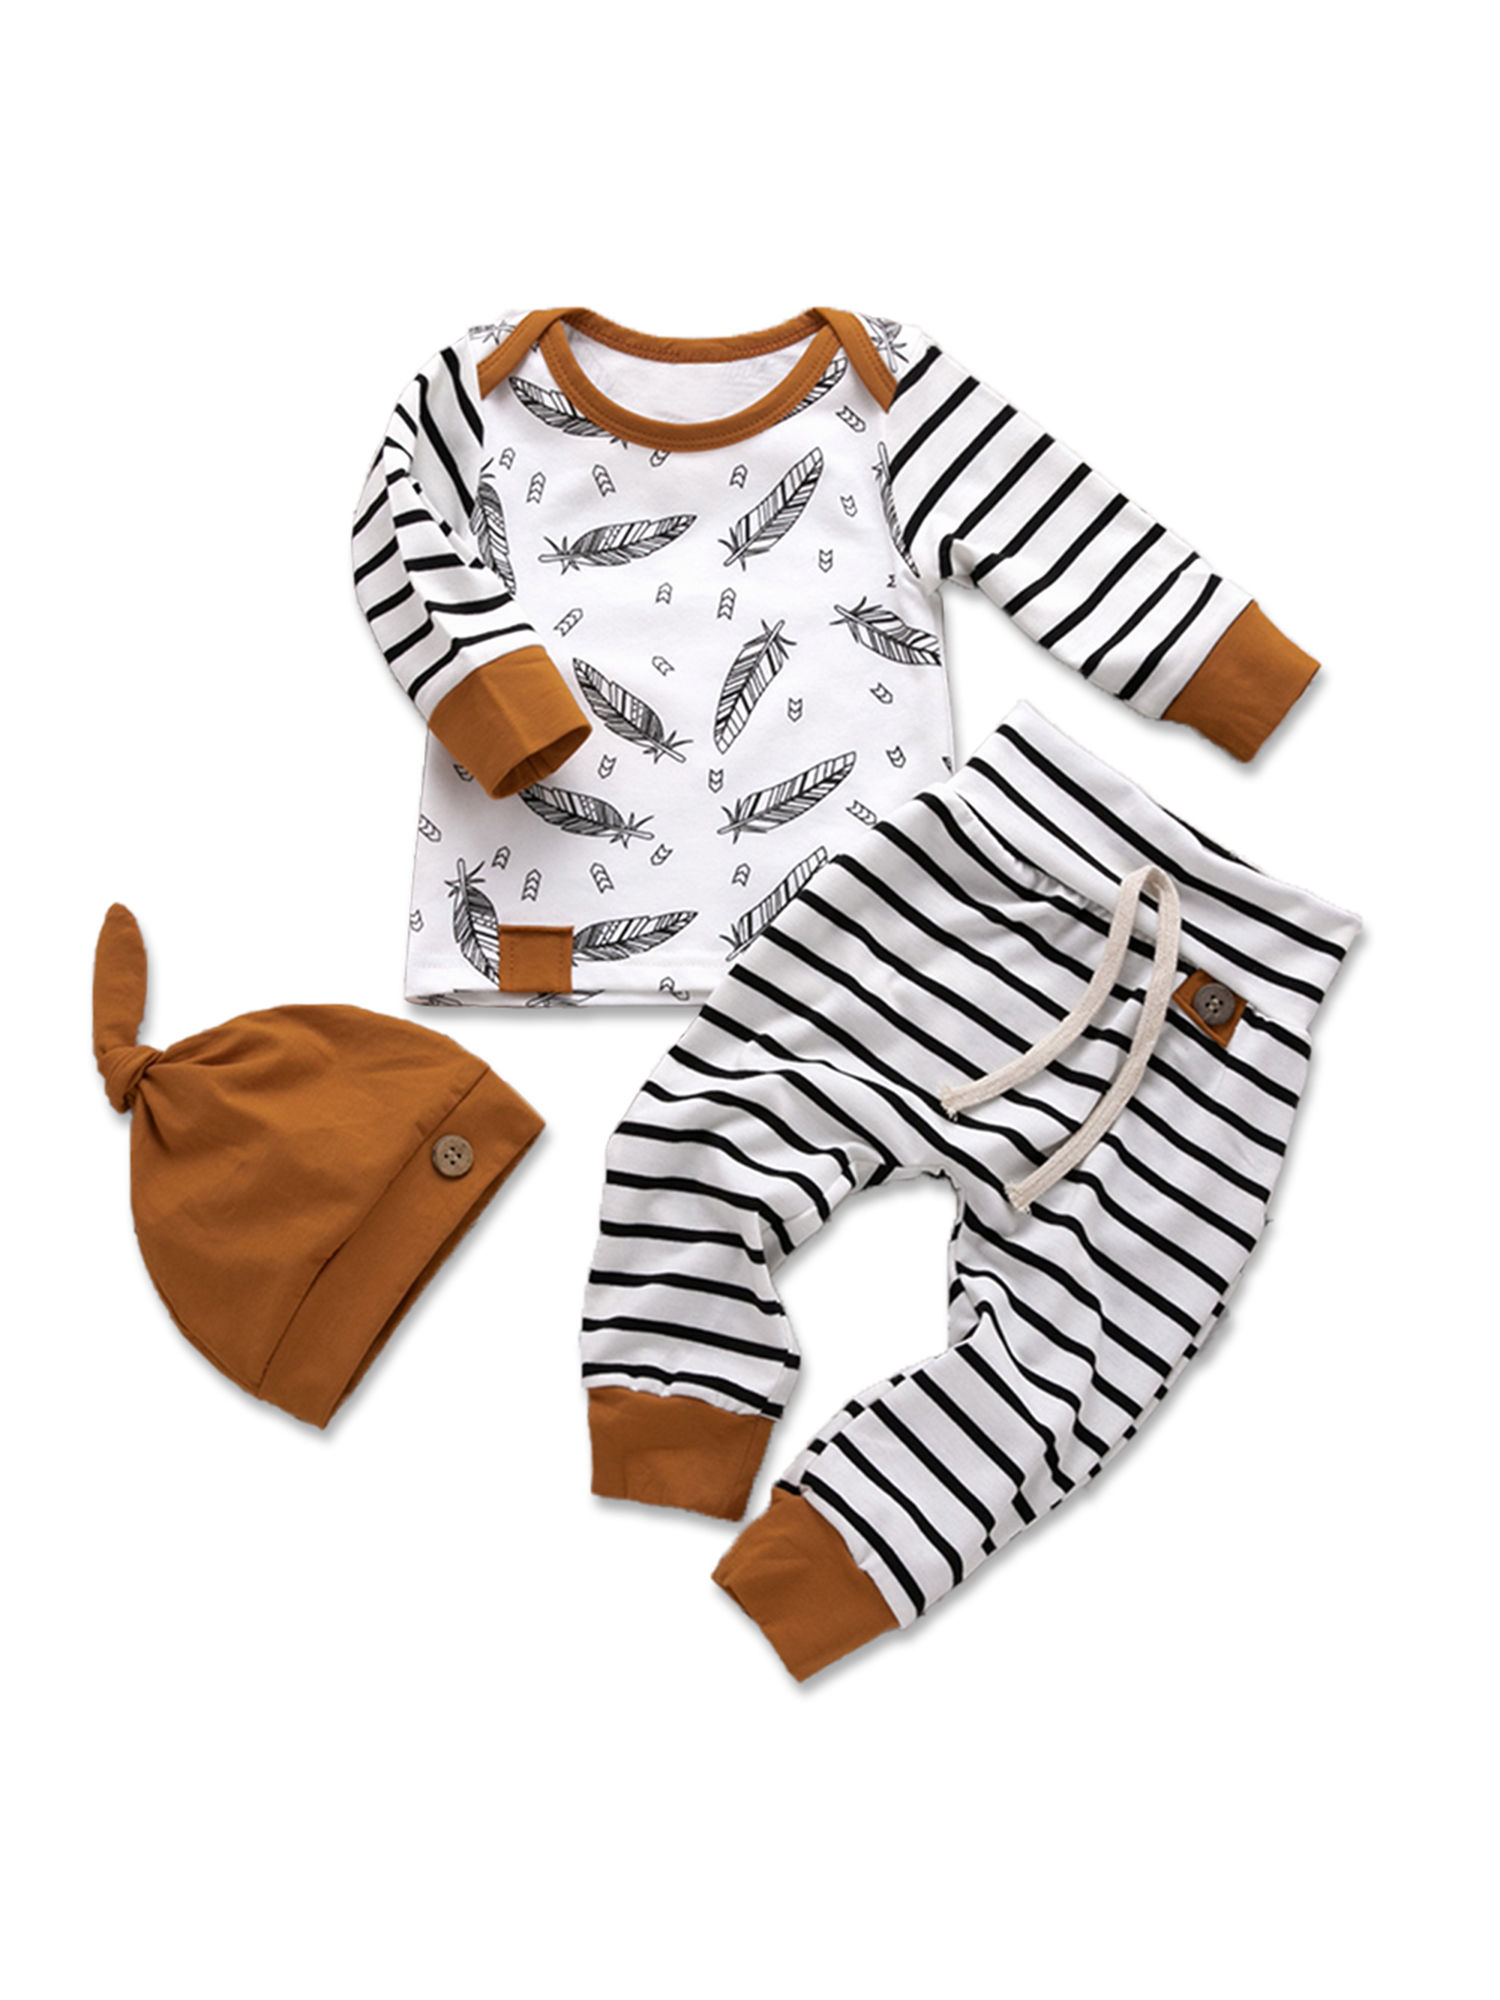 PatPat 3-piece Long Sleeve Striped Baby Cotton Outfit - Walmart.com